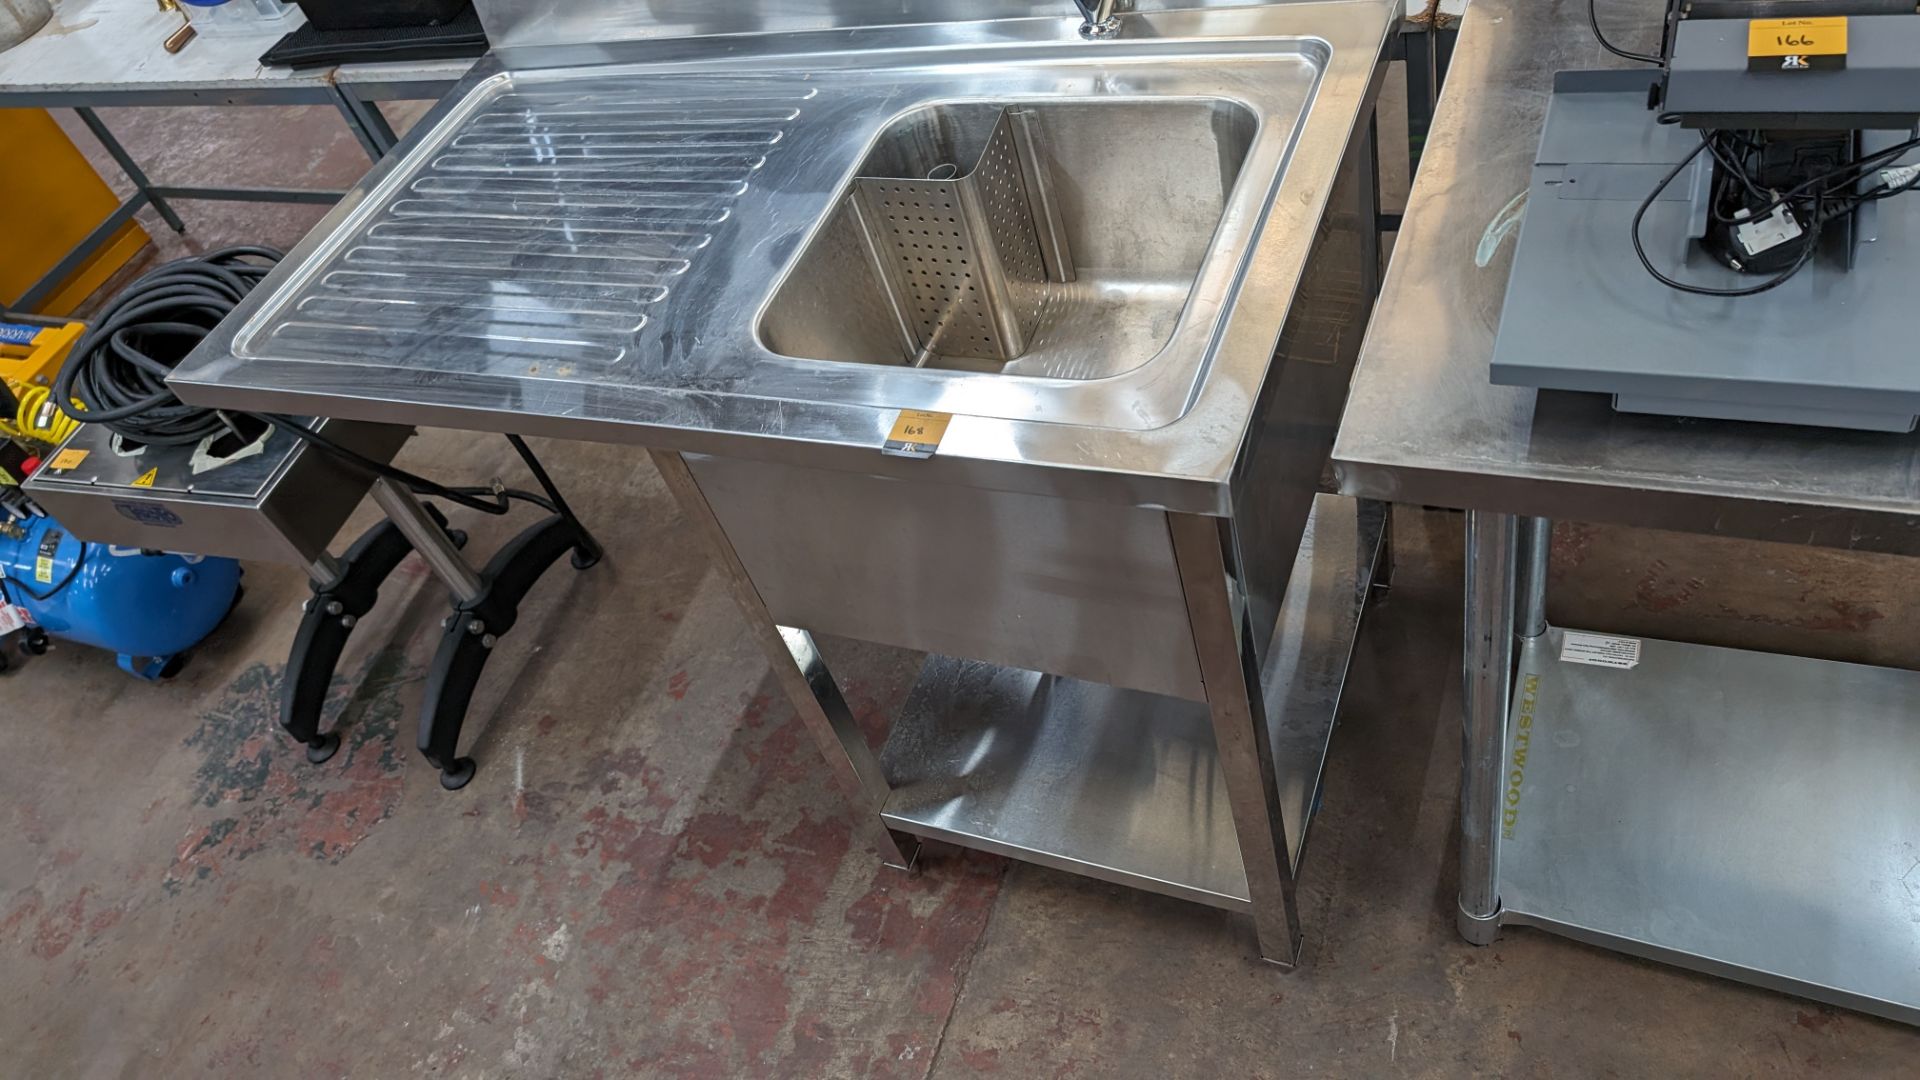 Stainless steel floor standing basin with drainer to the side plus mixer tap - Bild 3 aus 5